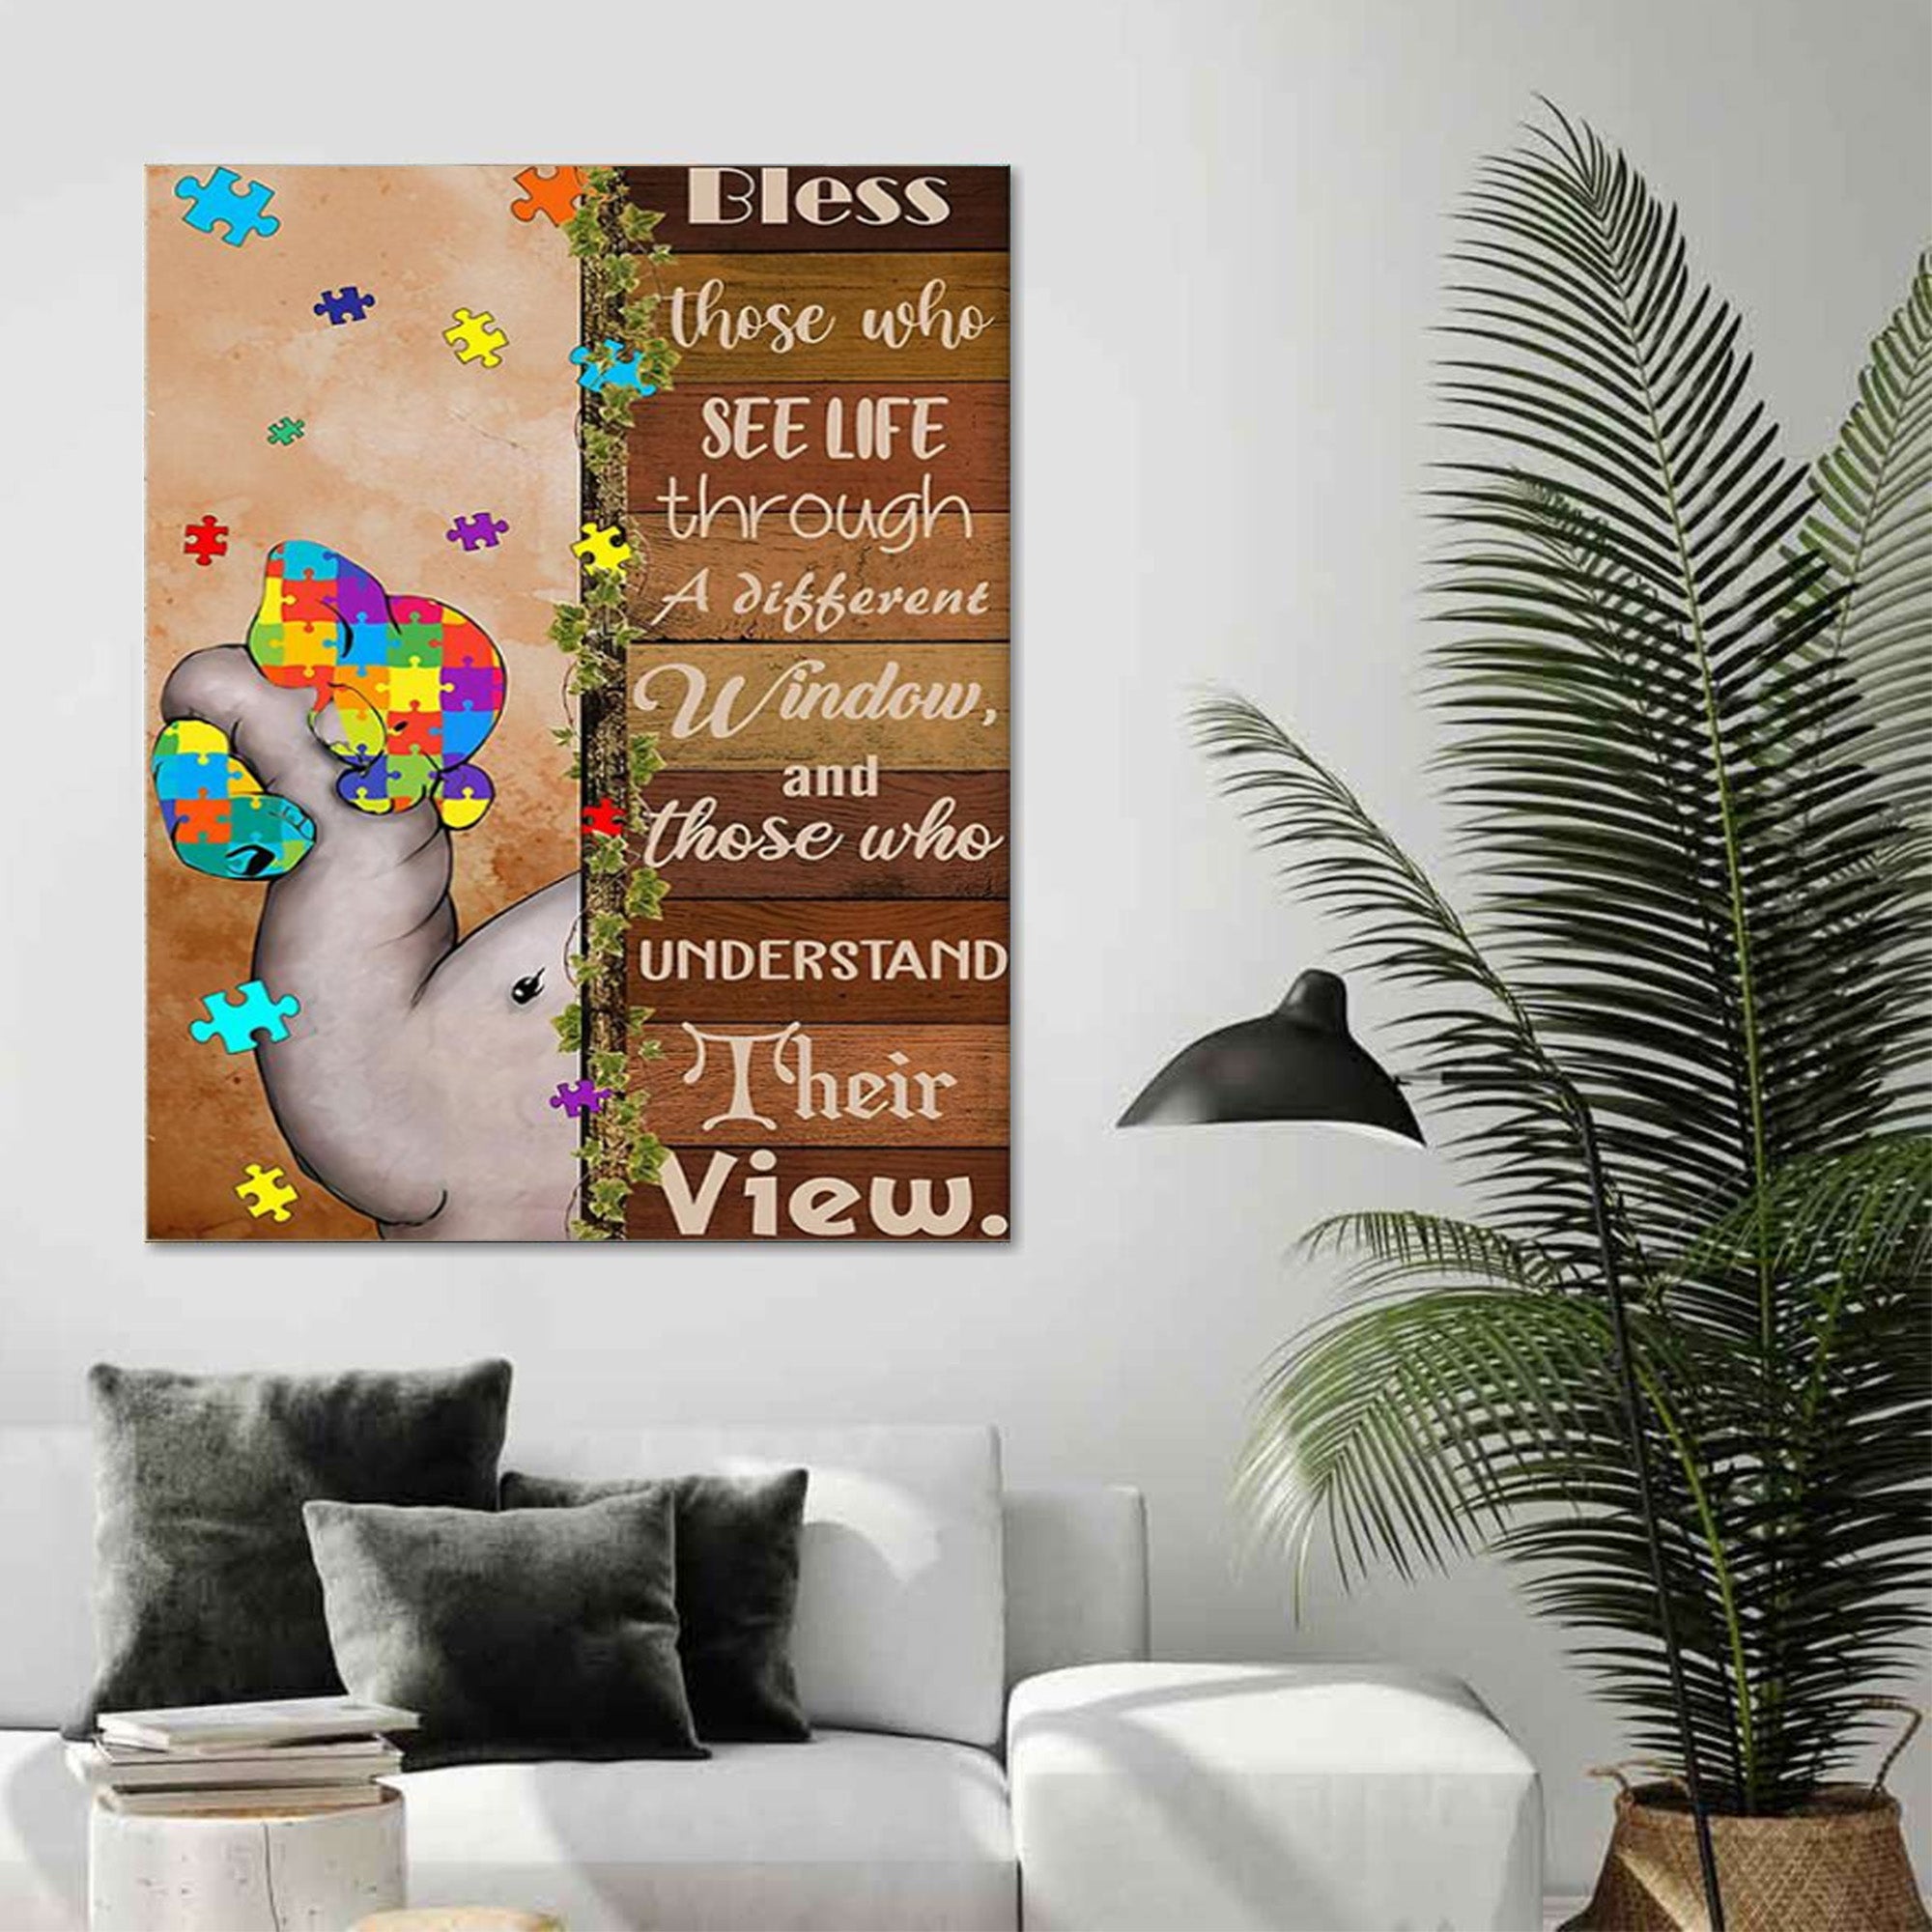 Autism Poster – Bless Those Who See Life Through A Different Window